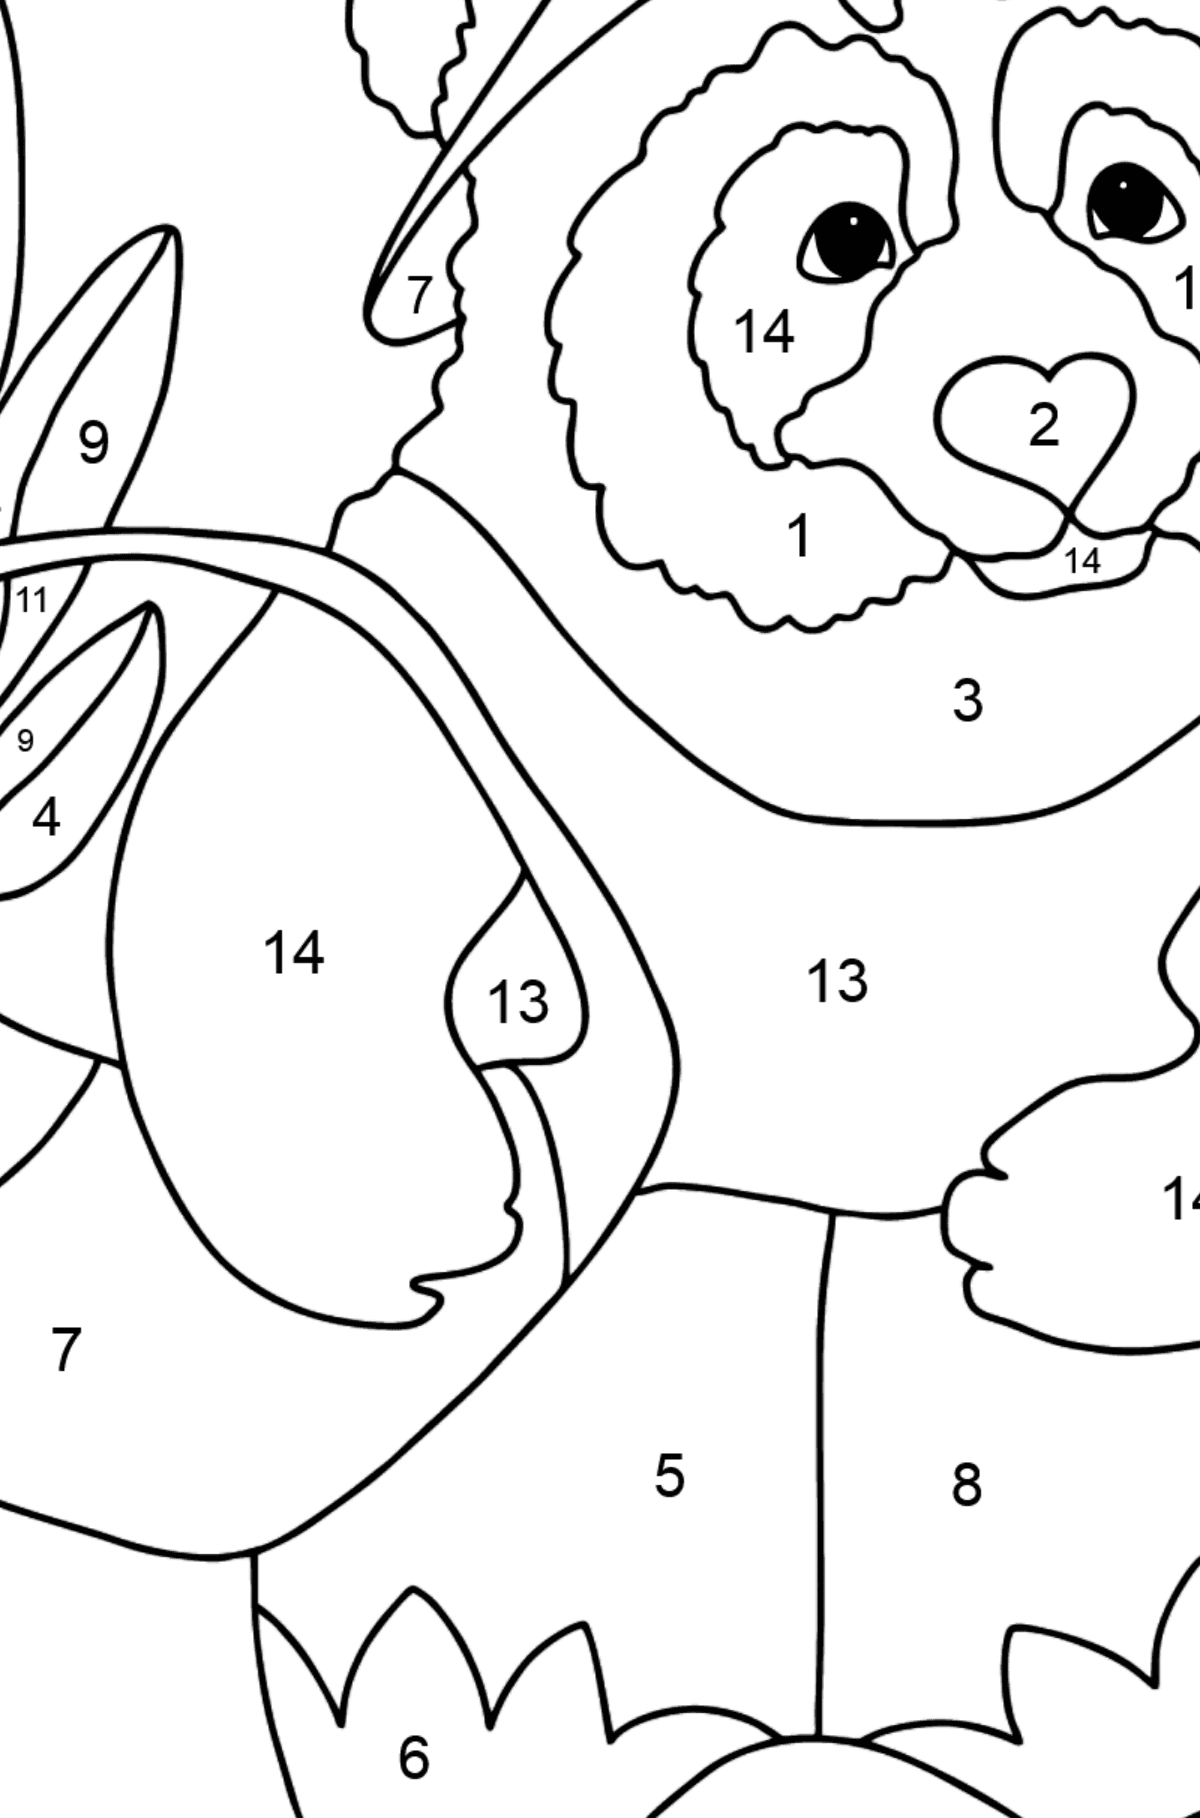 Coloring Page - A Panda with a Crop Basket - Coloring by Numbers for Kids